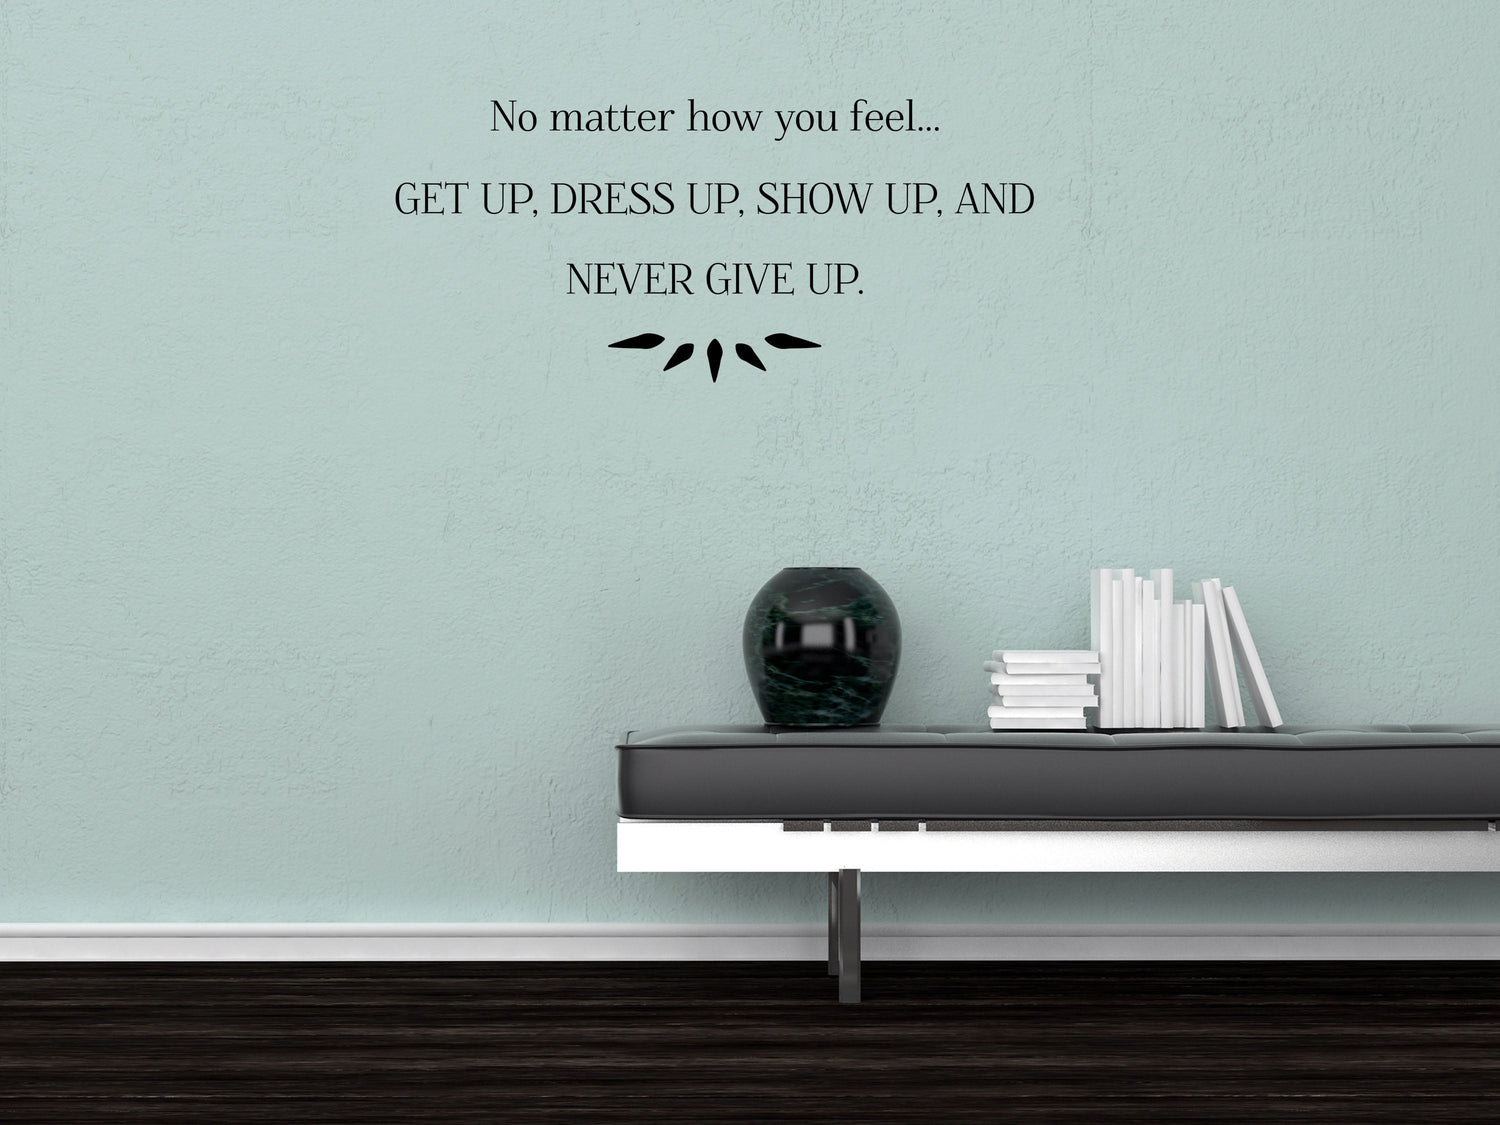 Get Up Dress Up Show Up Decal, Inspirational Decal, Never Give Up, Never Give Up Sign, Vinyl Wall Decal, Vinyl Wall Art, Inspirational Sign Vinyl Wall Decal Inspirational Wall Signs 